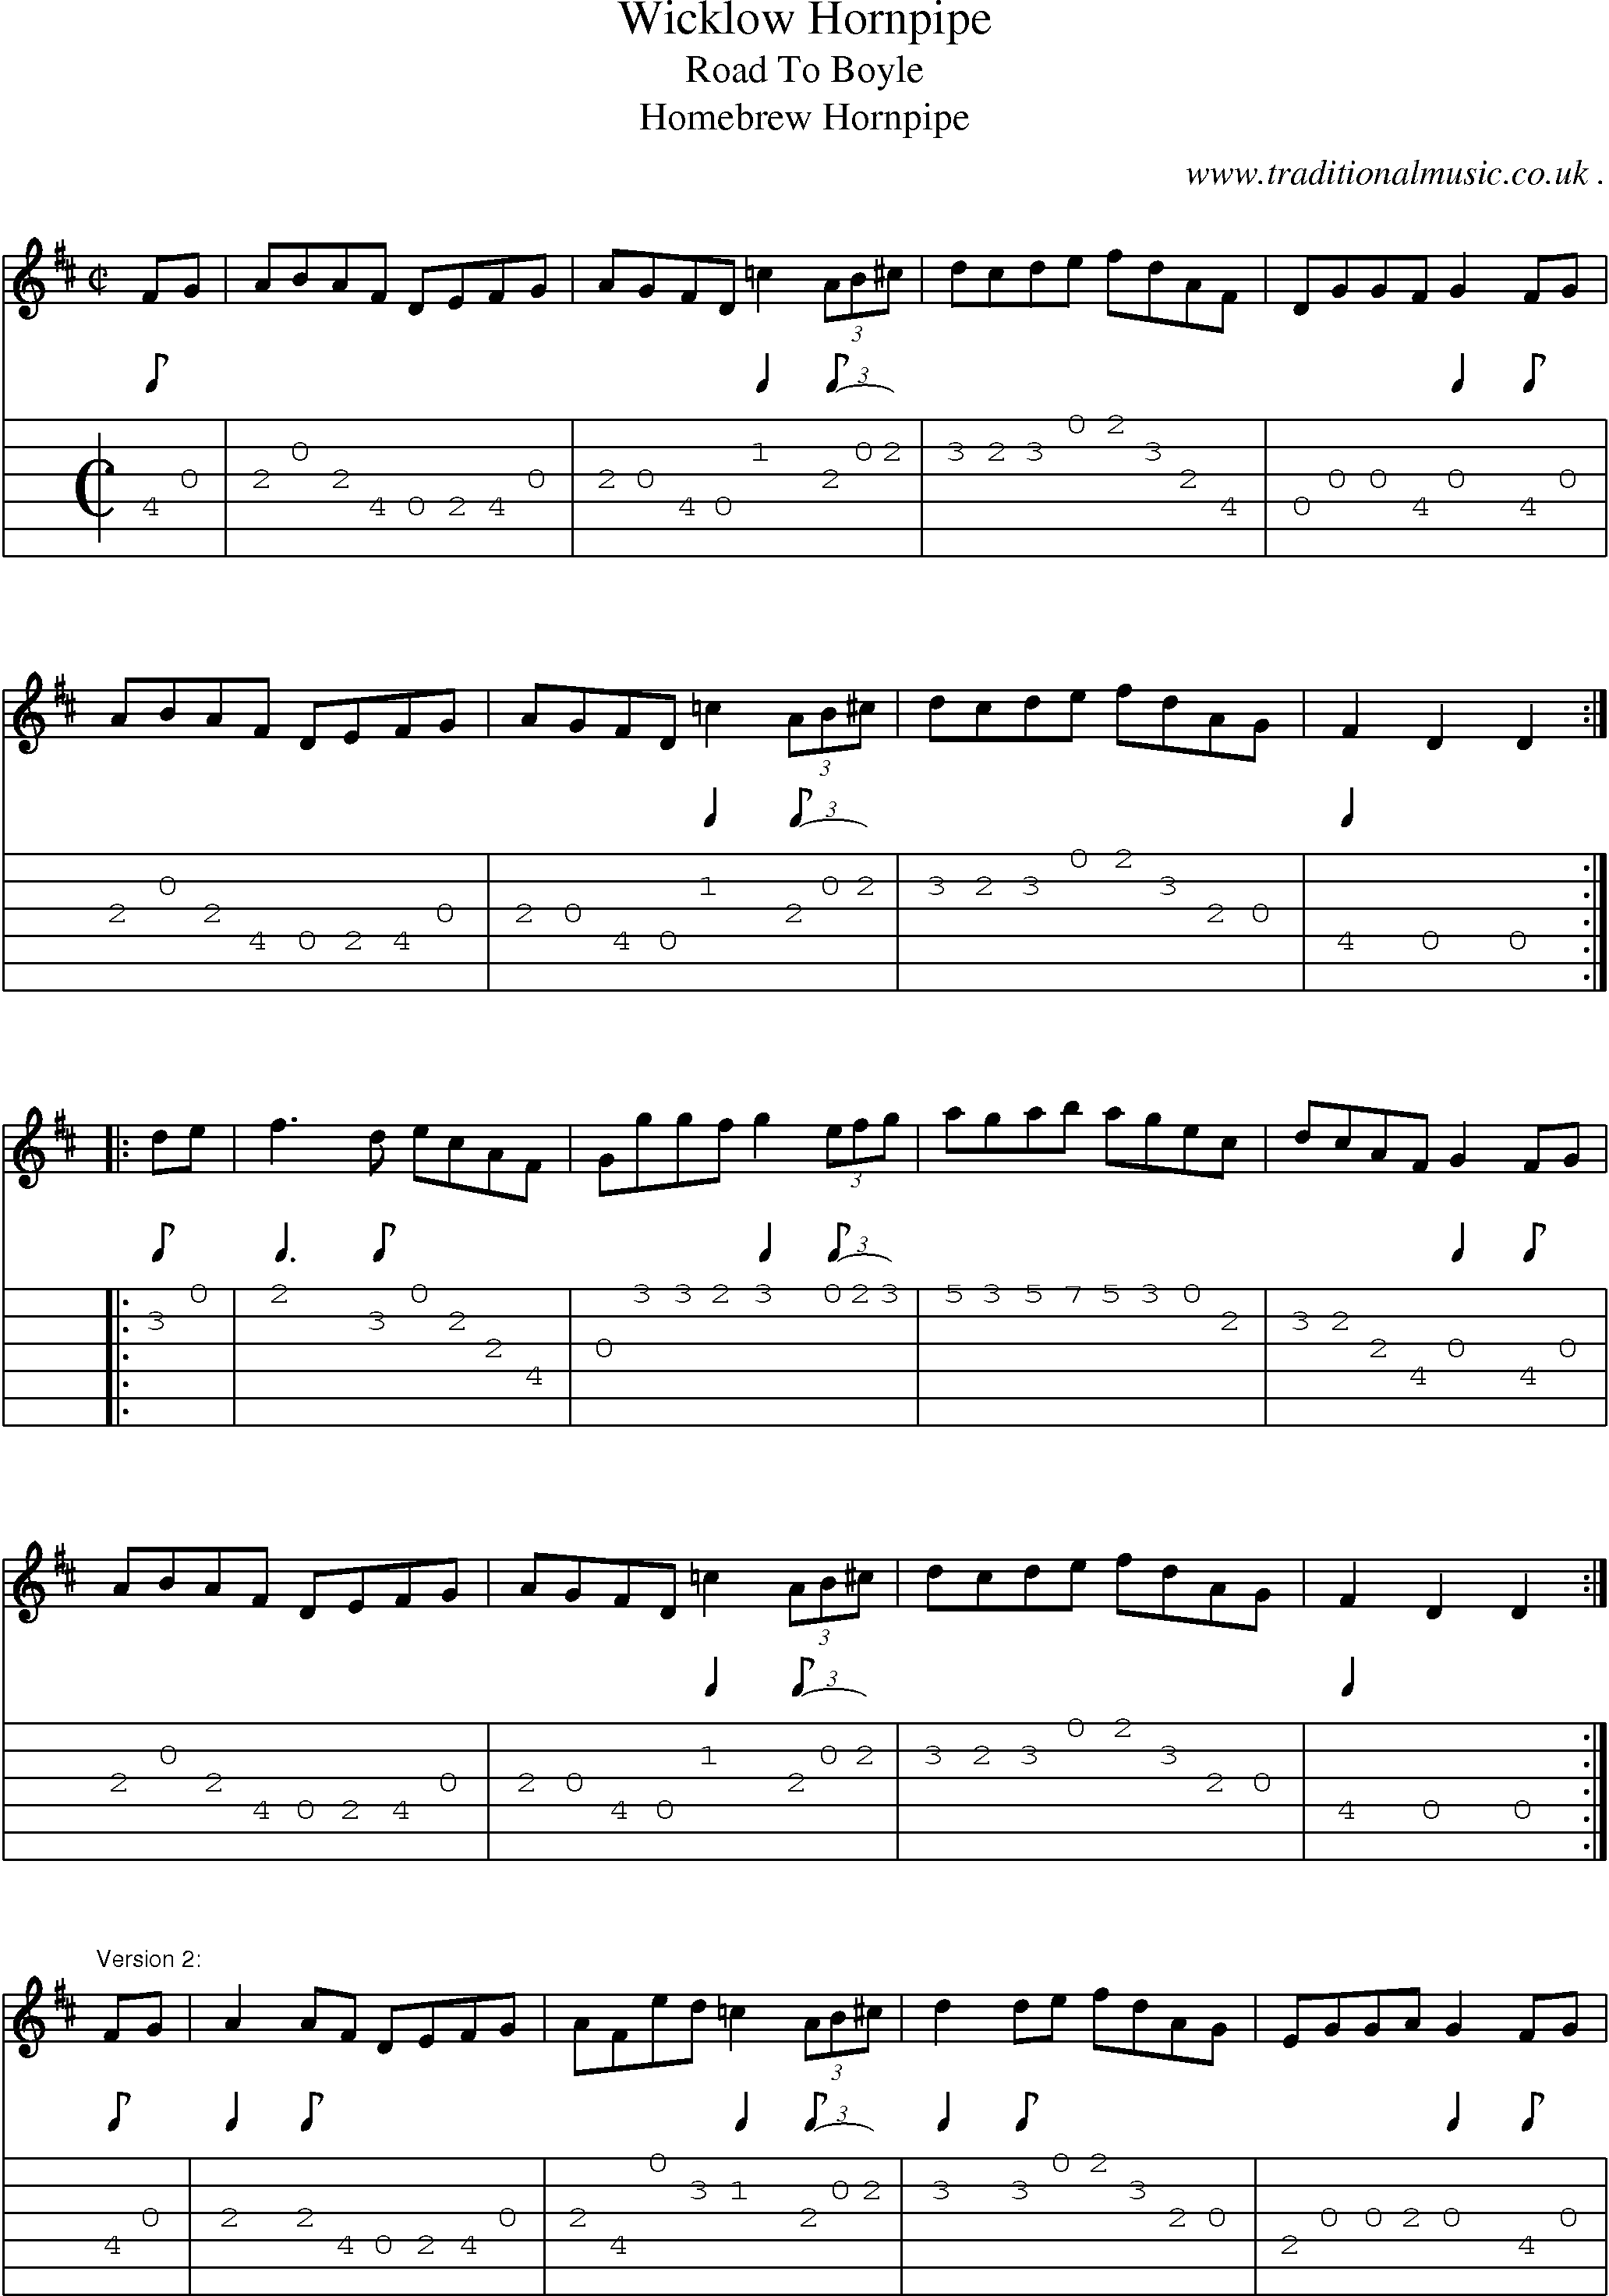 Sheet-Music and Guitar Tabs for Wicklow Hornpipe